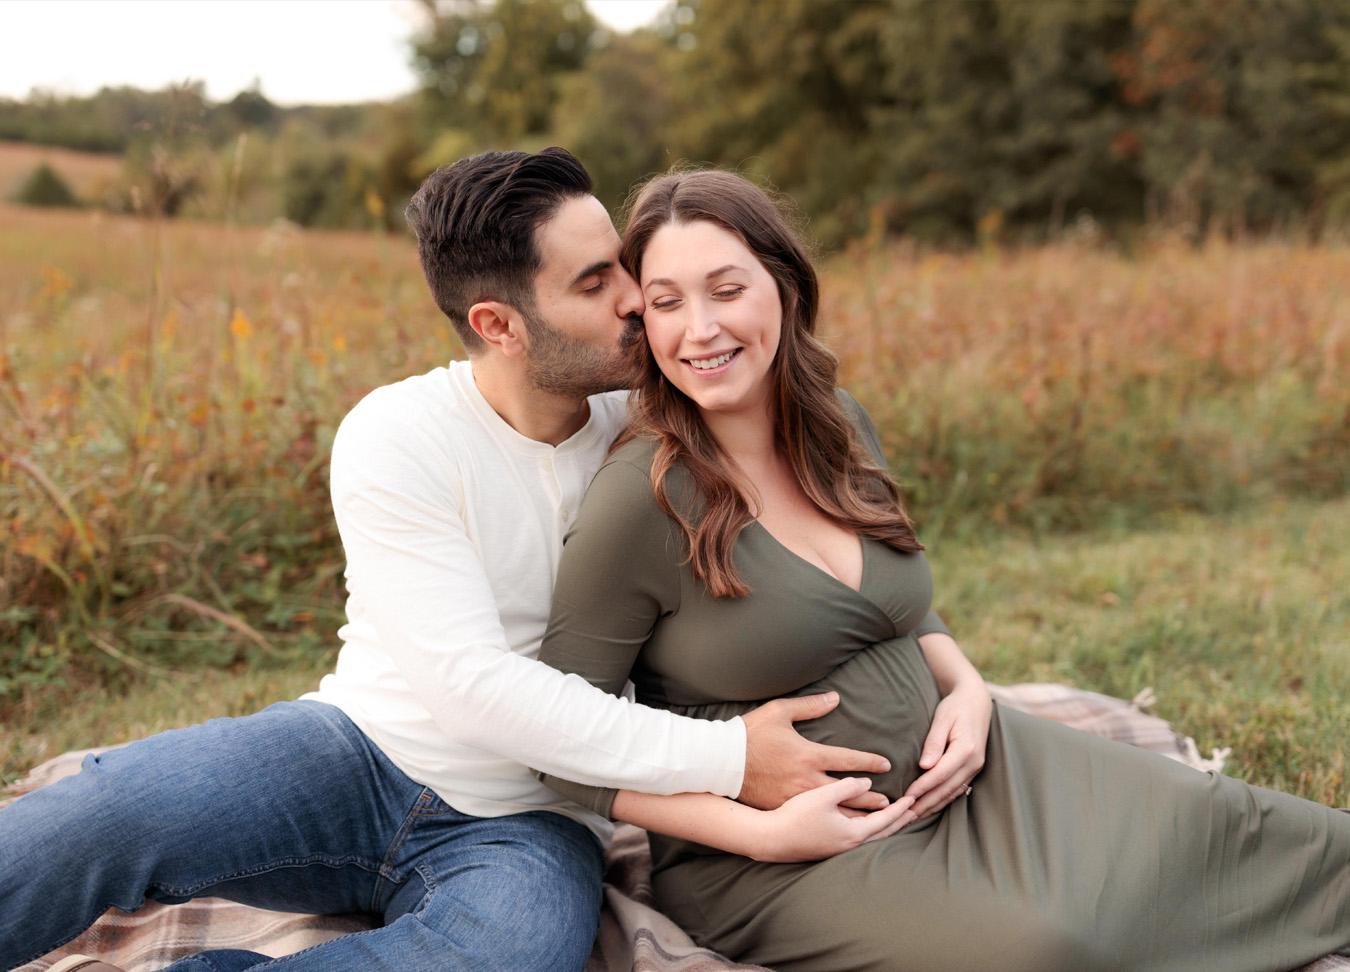 maternity session featuring a pregnant mom and a dad kissing her cheek captured by an expert northern virginia maternity photographer